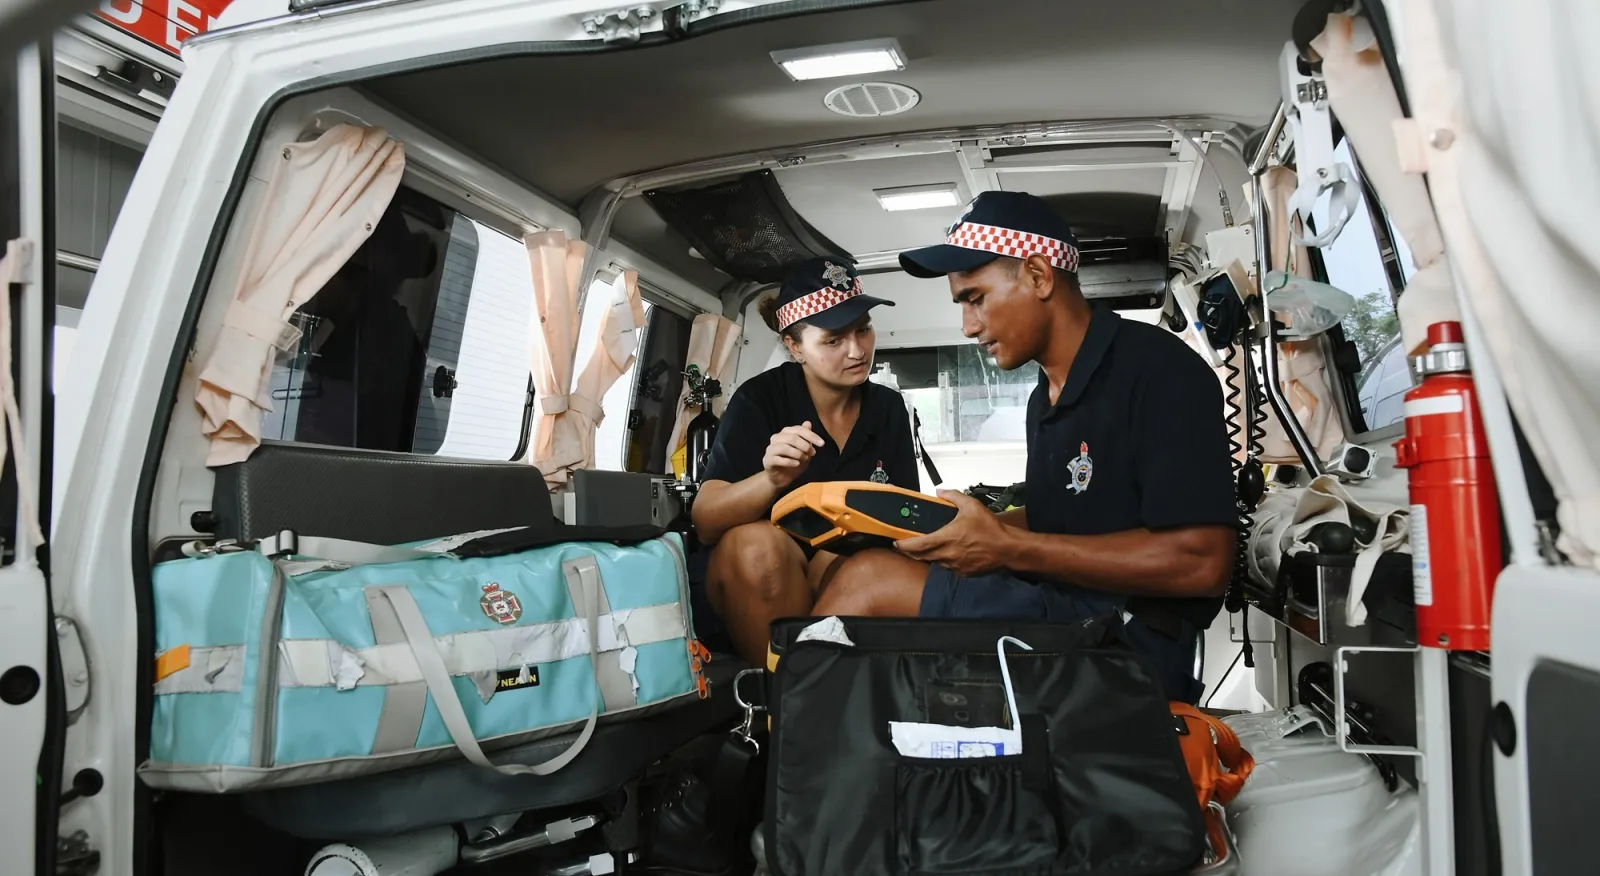 Two people sitting in the back of an ambulance, ready to provide medical assistance.